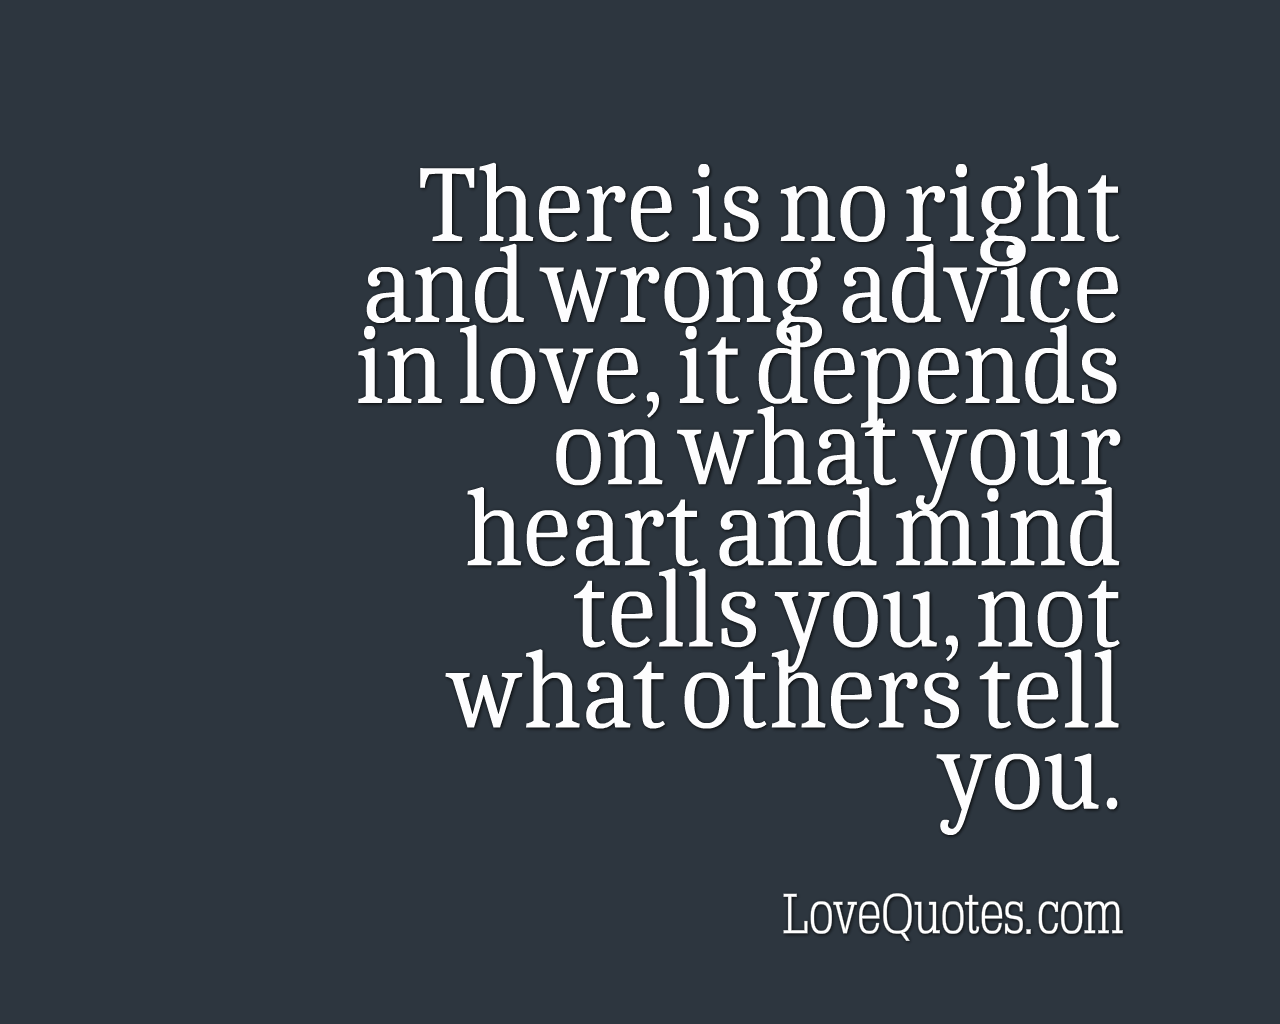 Right And Wrong Advice In Love